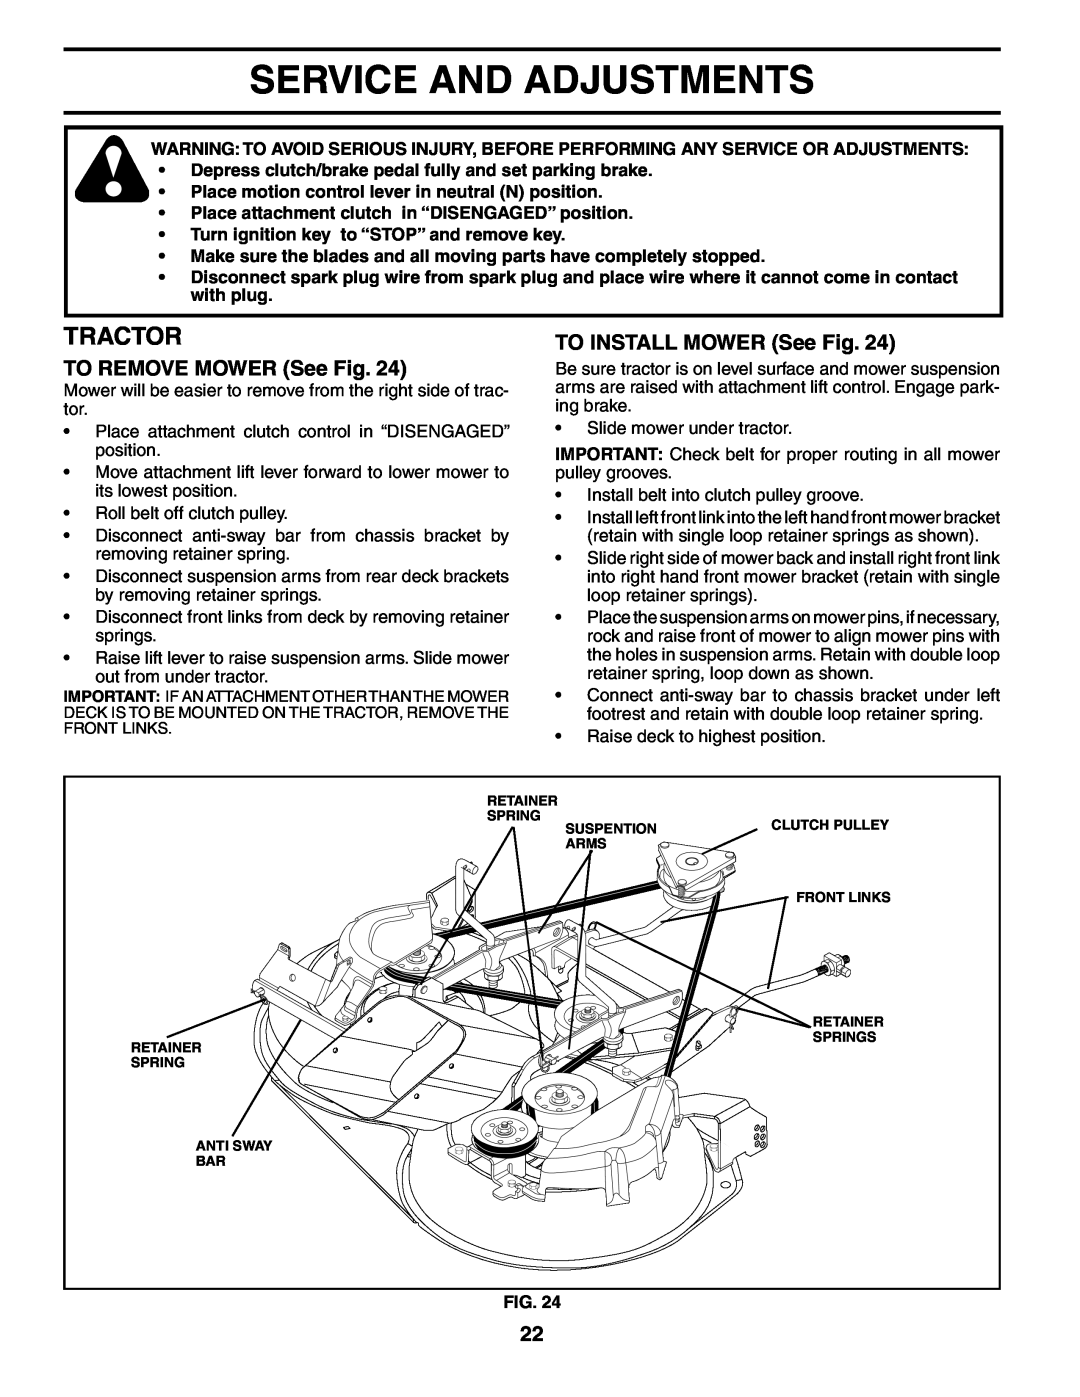 Husqvarna CTH180 XP 02764 owner manual Service And Adjustments, TO REMOVE MOWER See Fig, TO INSTALL MOWER See Fig, Tractor 